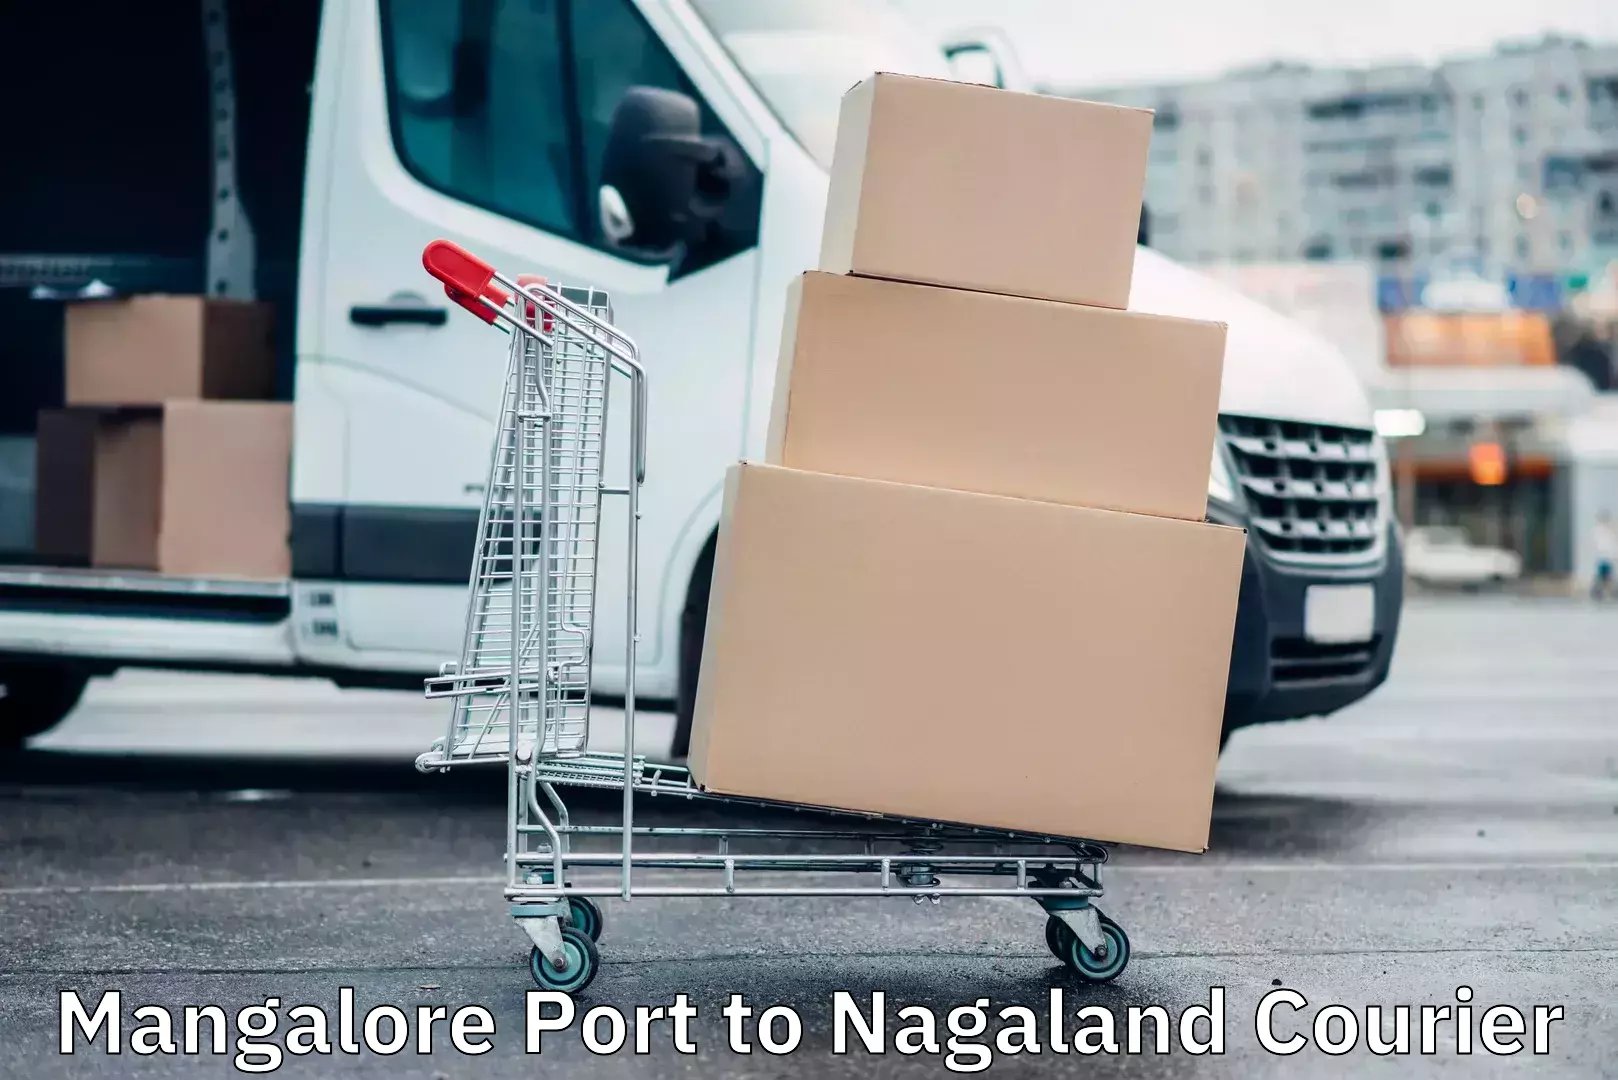 Fast delivery service Mangalore Port to Nagaland